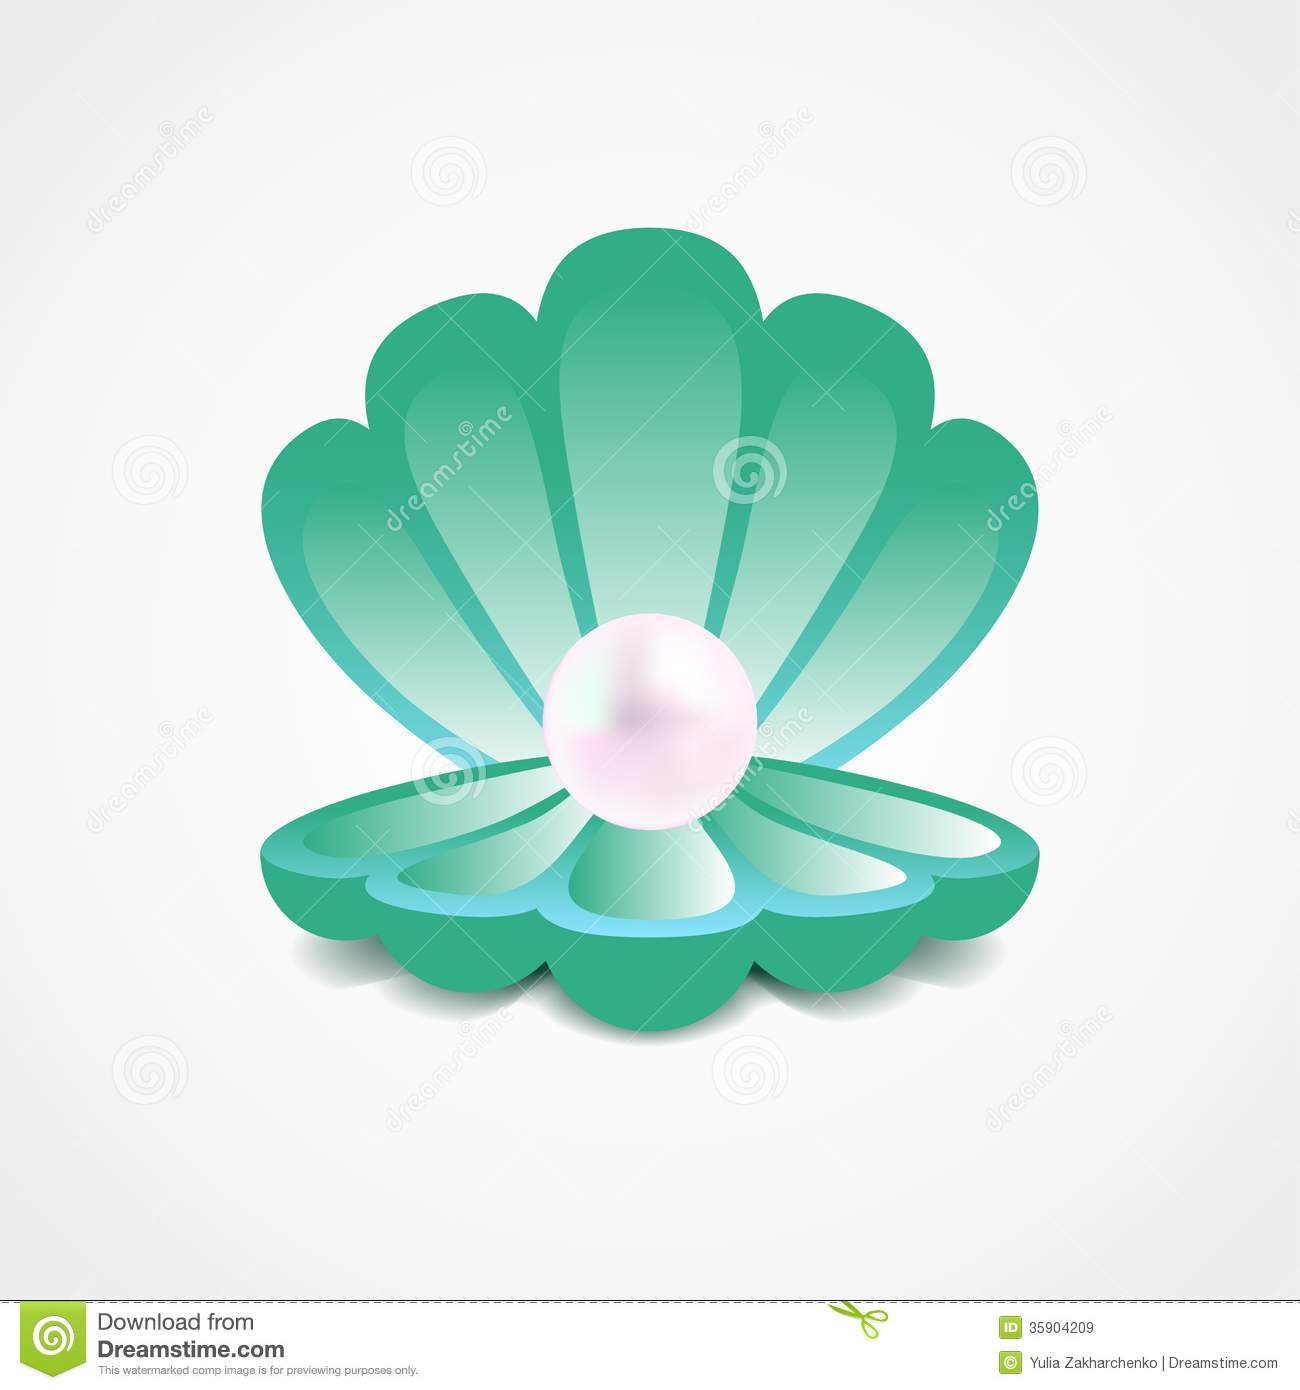 Vector Sea Green Shell With A Pearl Inside Royalty Free Stock Images